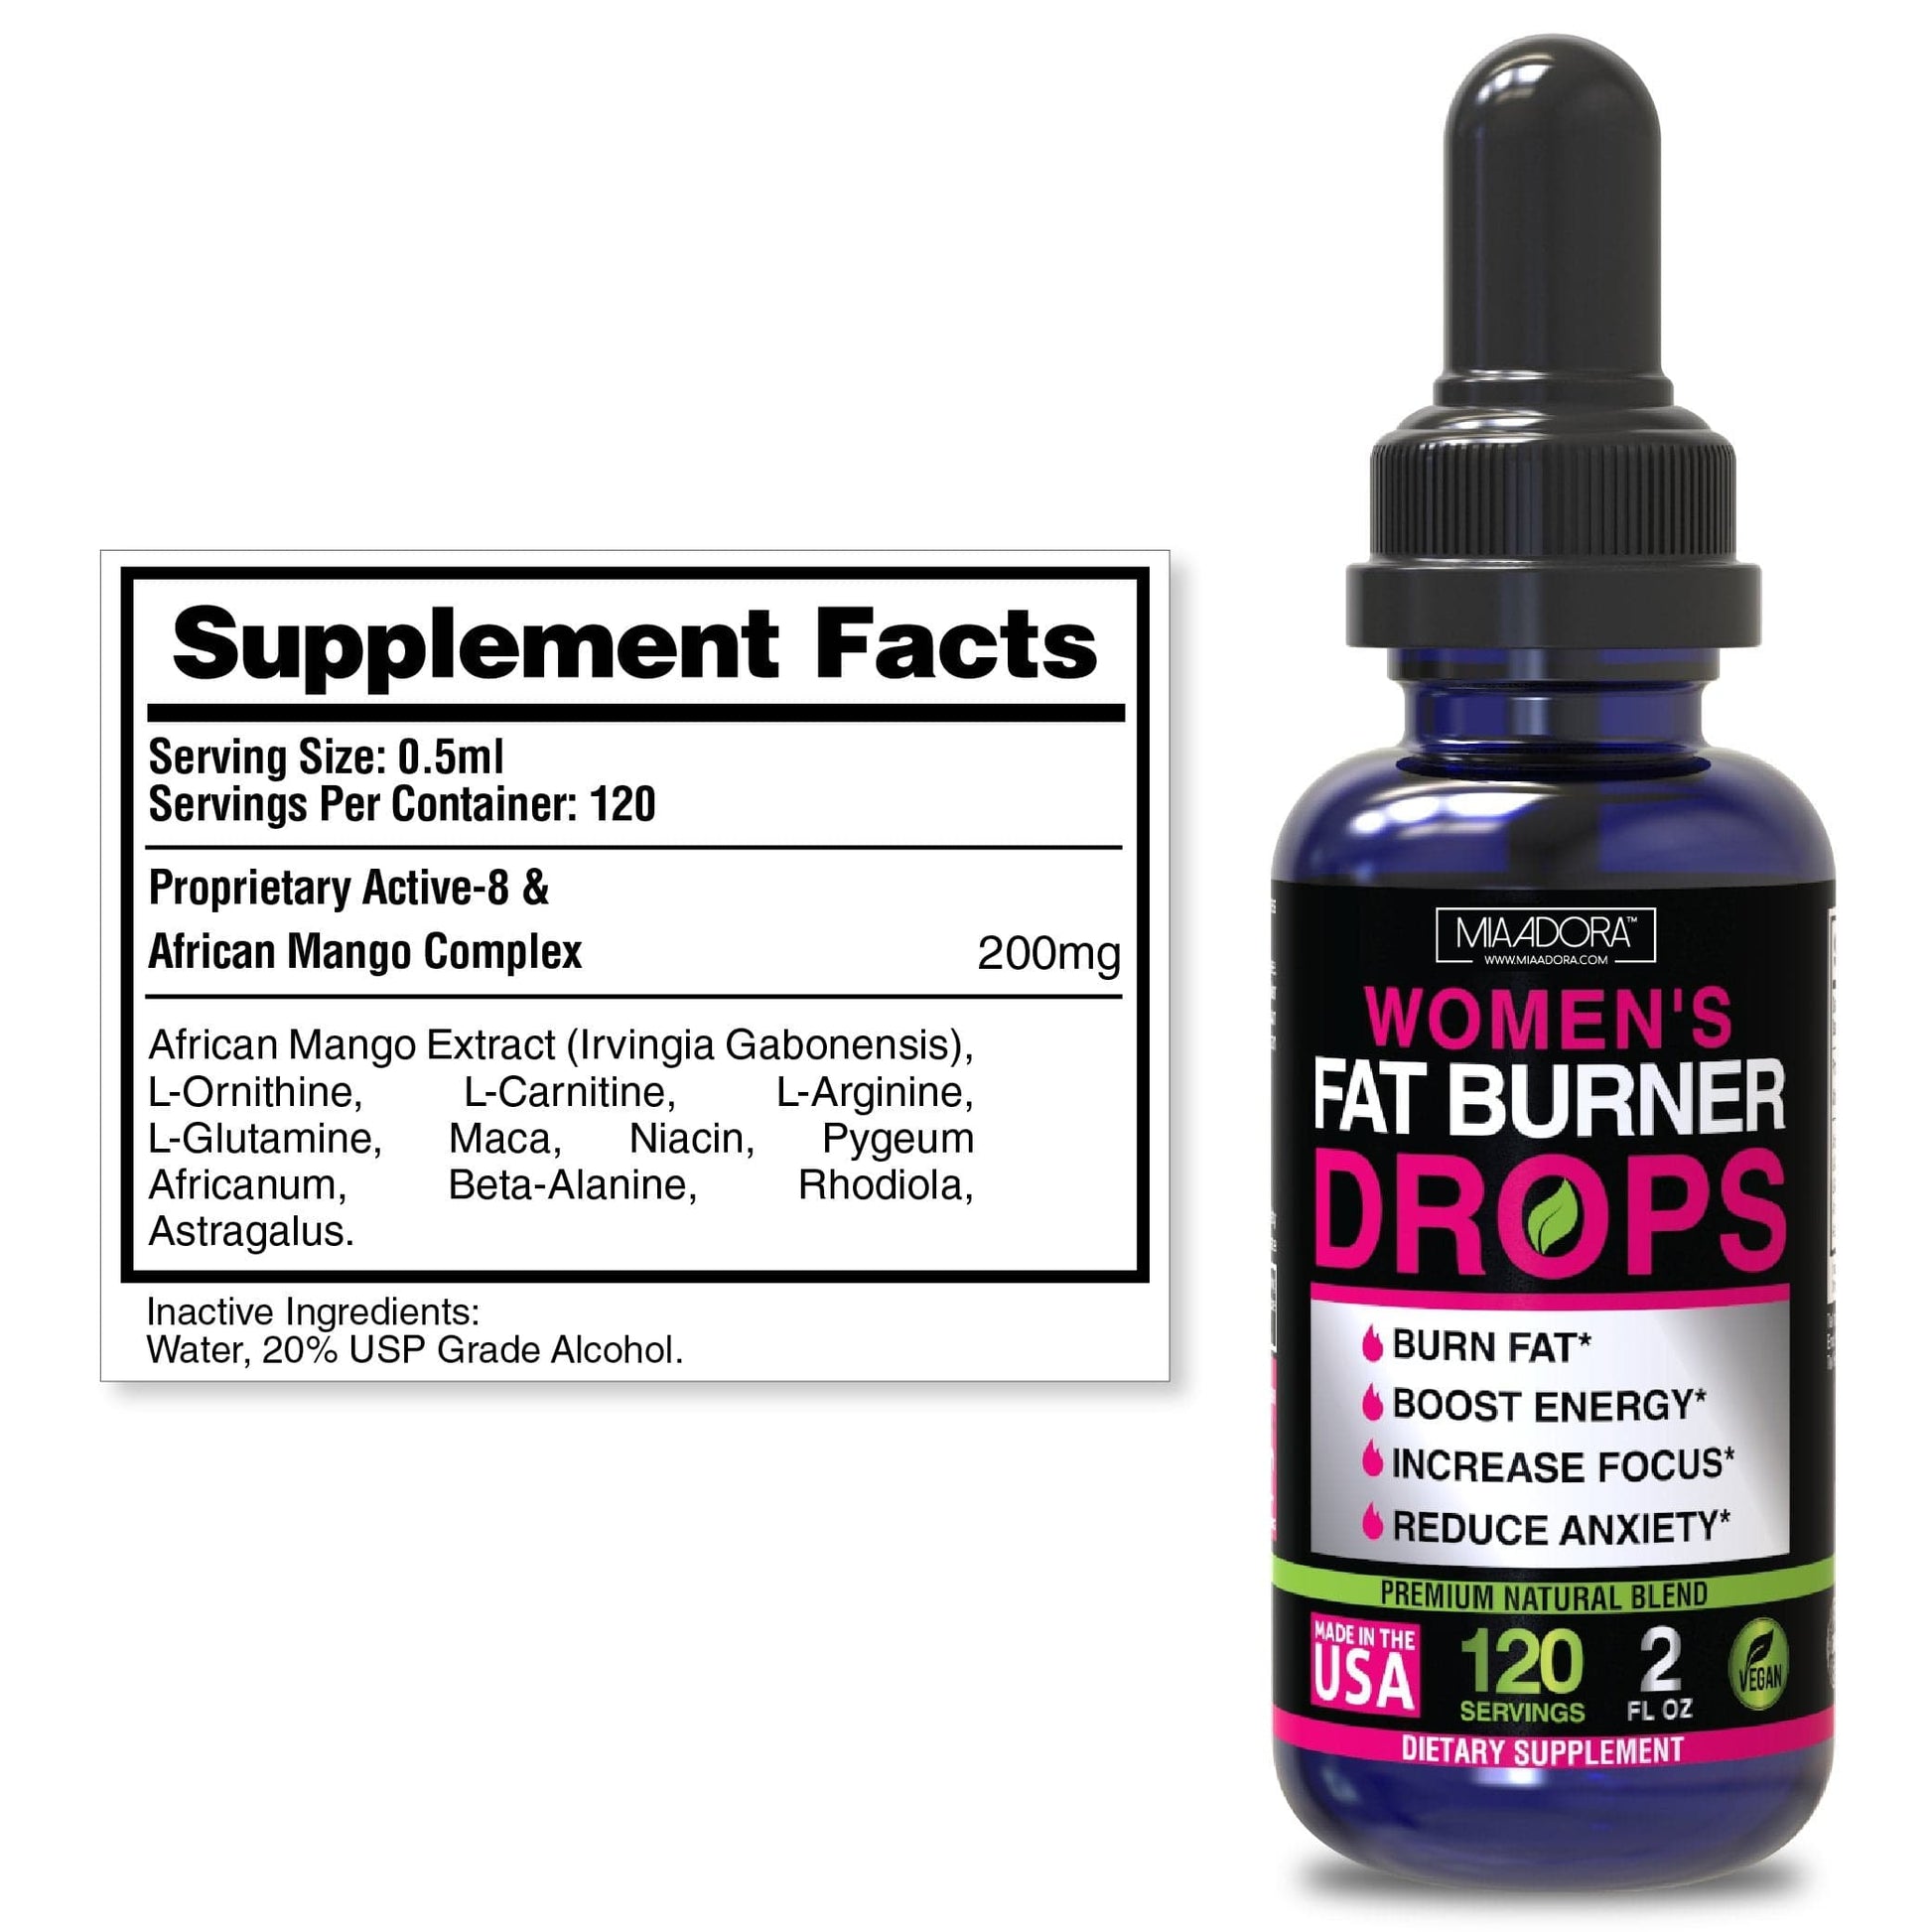 Supplement facts of fat burner drops by Mia Adora: Serving Size 0.5ml. serving per container 120